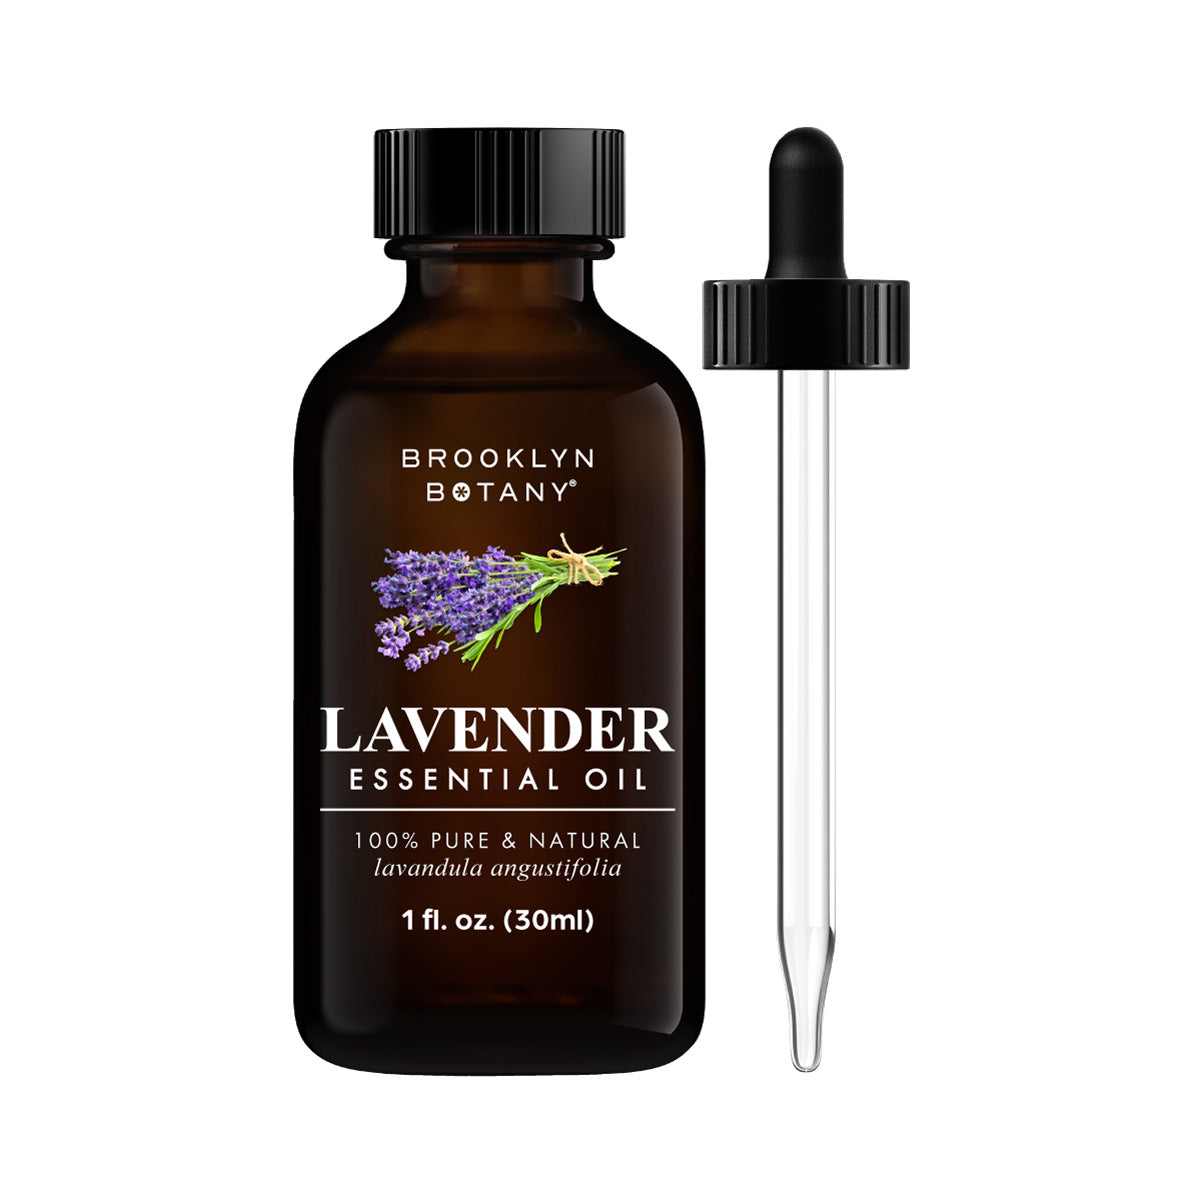 Shopify-BB-30ml-Lavender-Essential-Oil-Main-Image-with-Sides.jpg